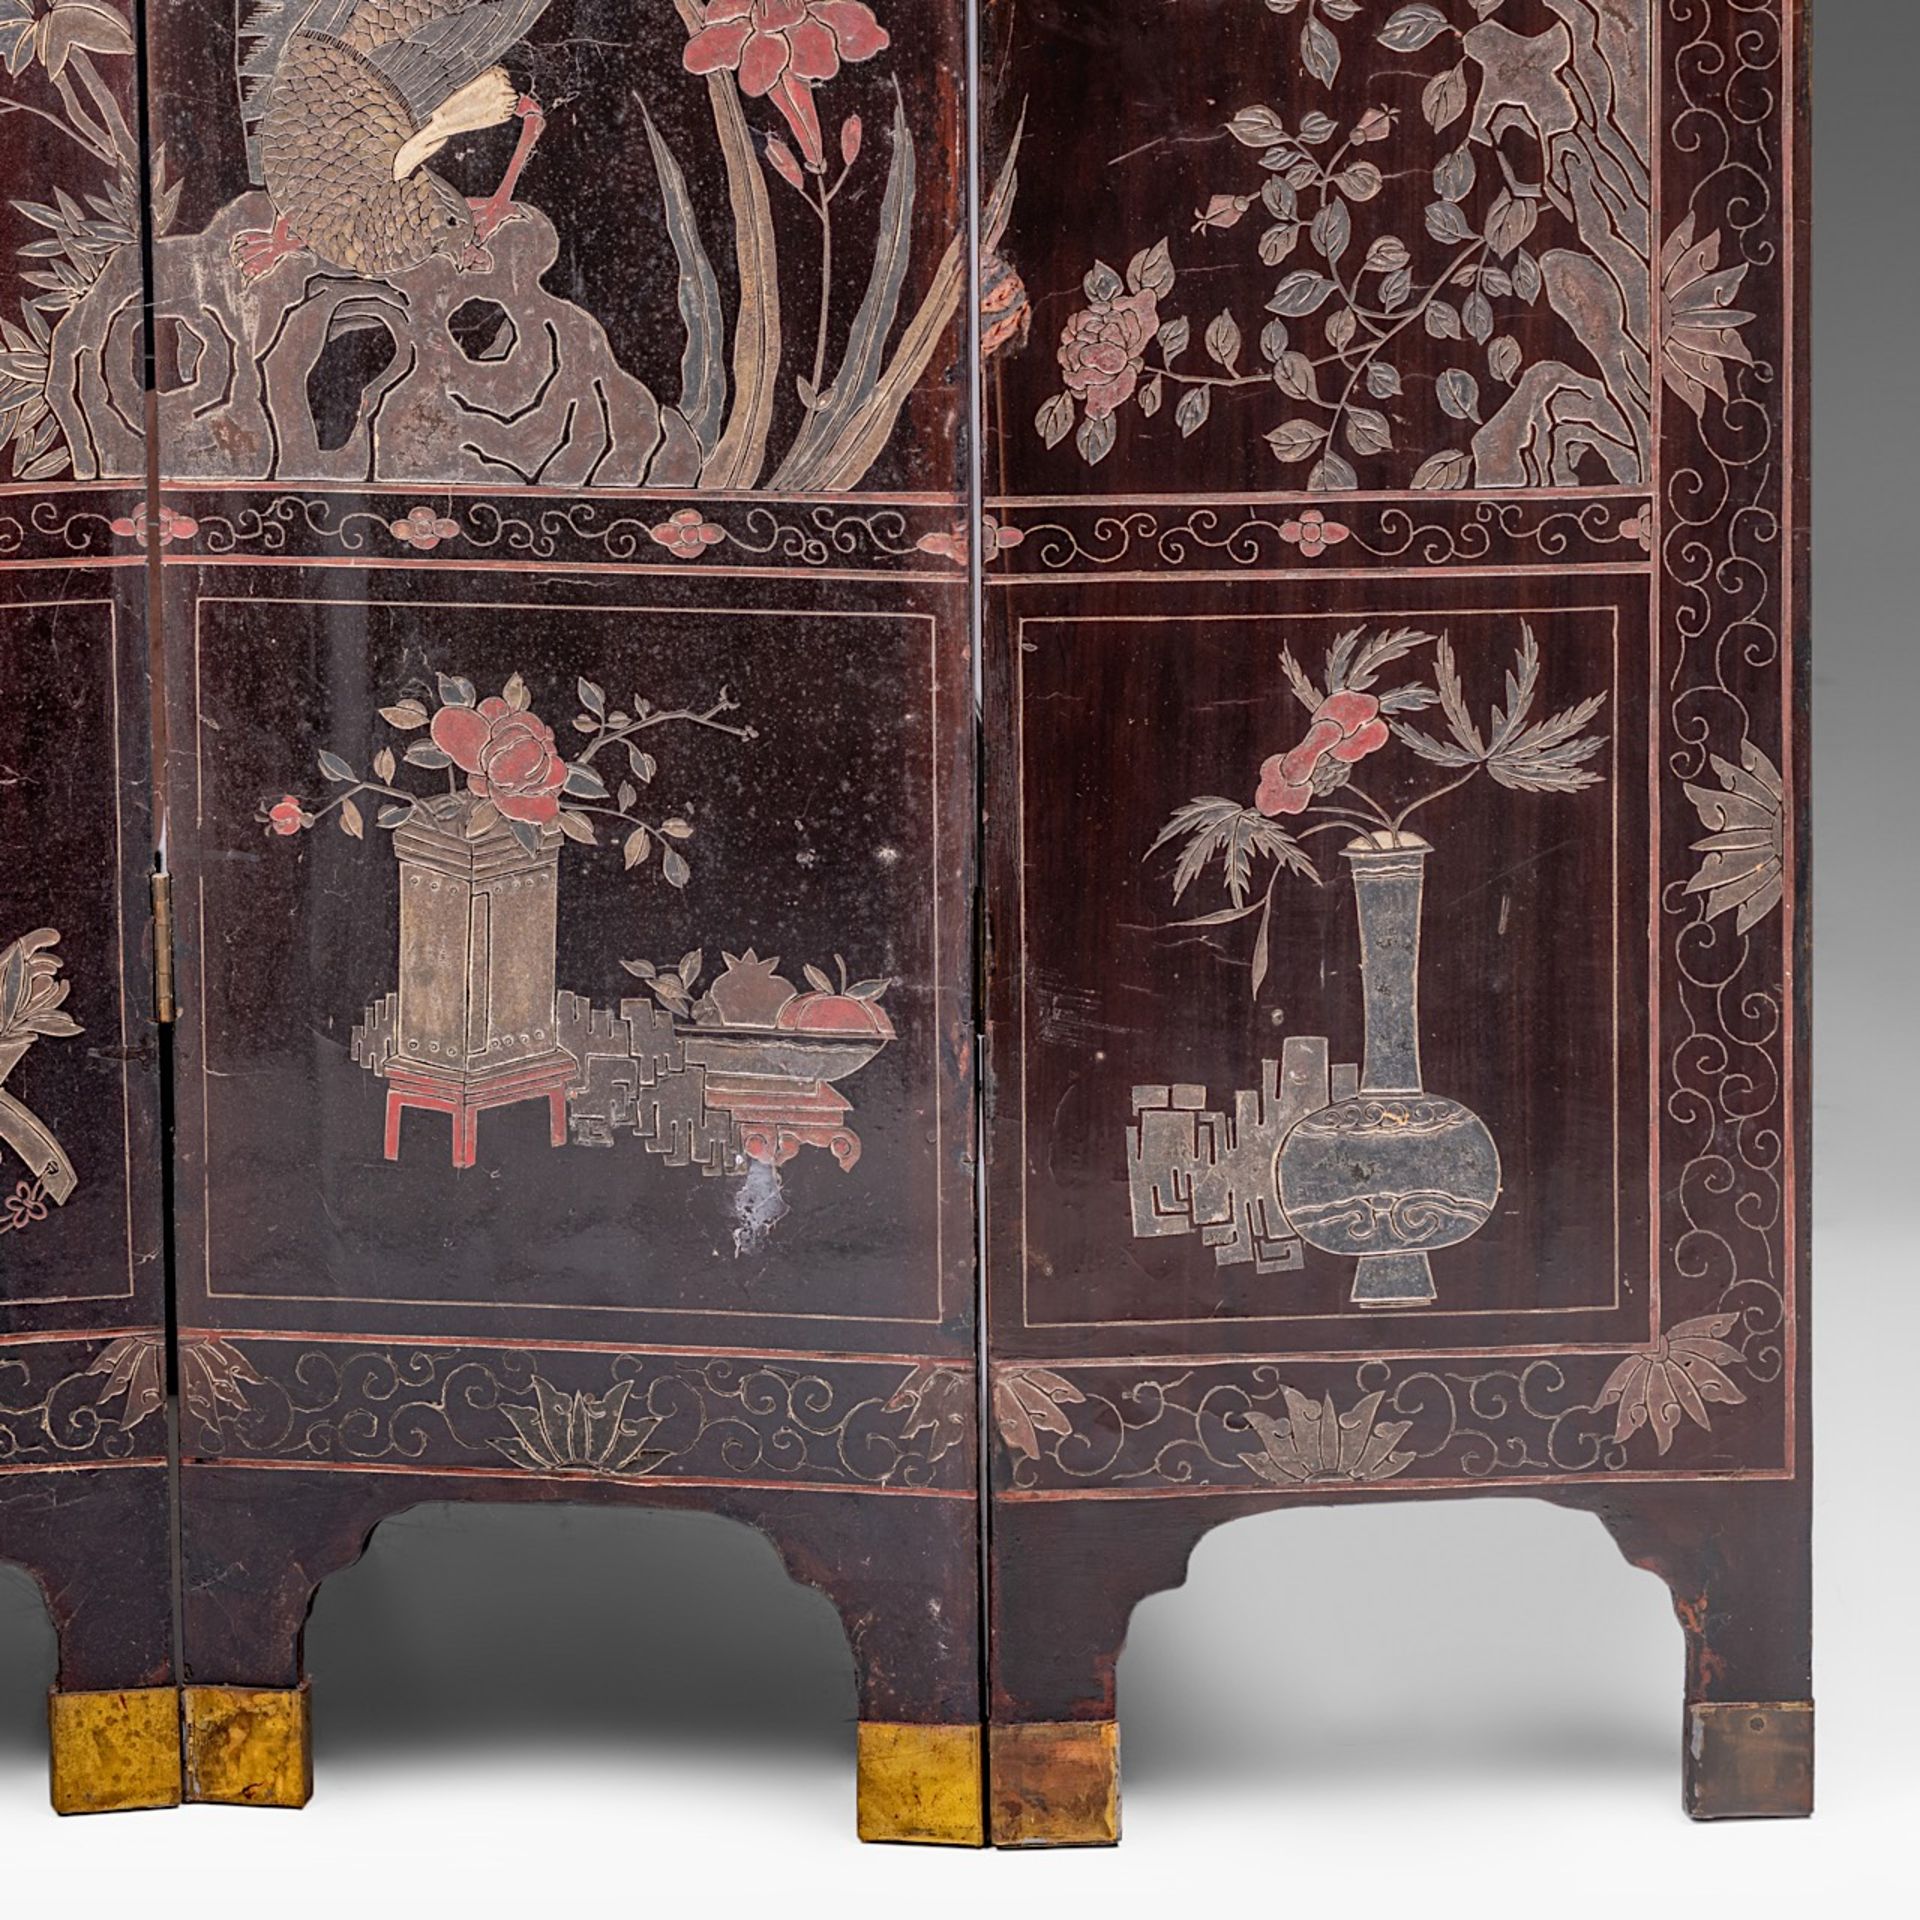 A Chinese coromandel lacquered four-panel chamber screen, late 18thC/19thC, H 162 - W 35,5 (each pan - Image 4 of 10